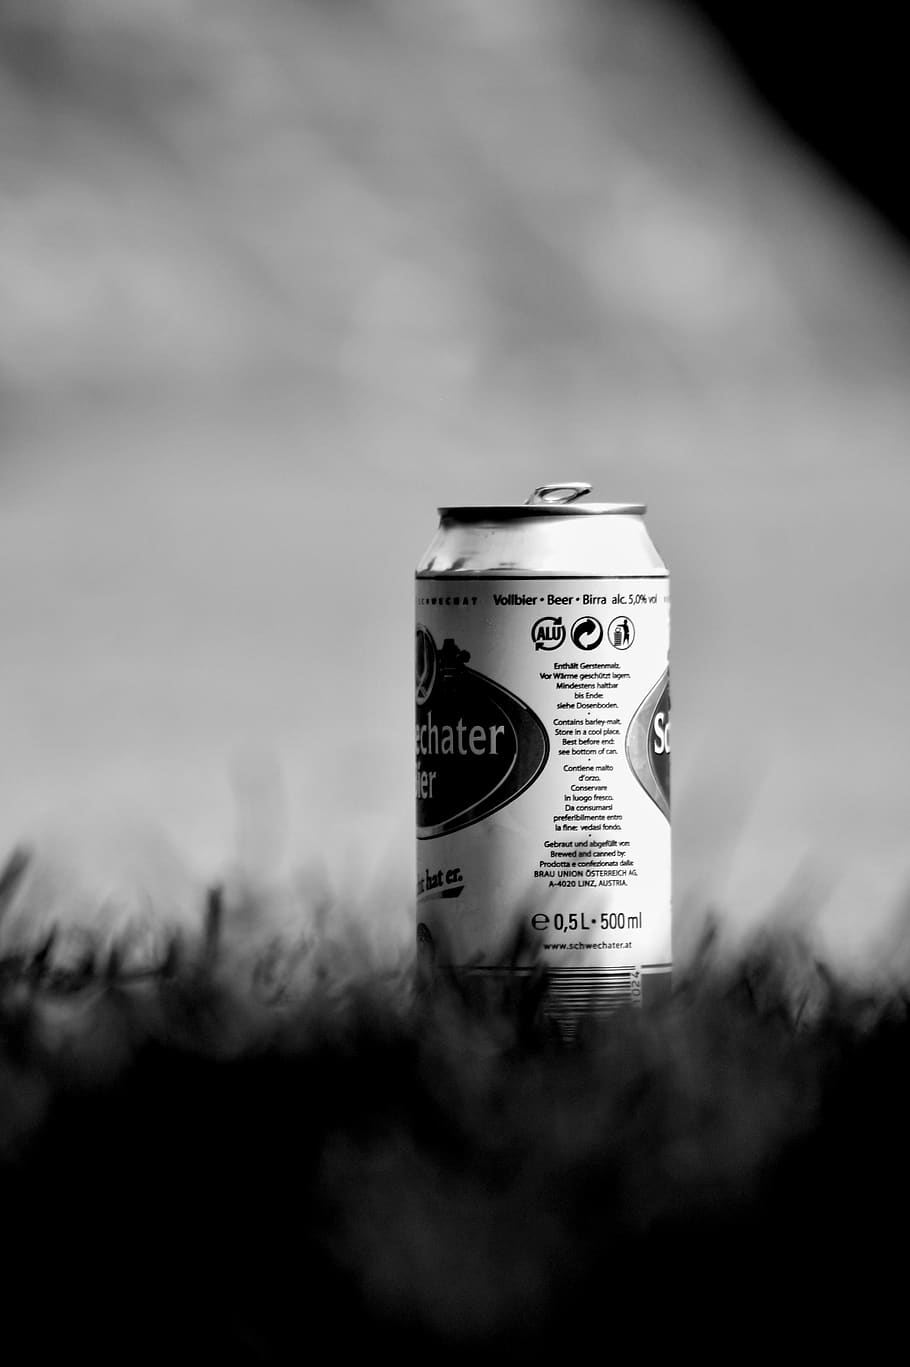 can, beer, grass, black and white photography, solitude, finance, selective focus, text, currency, close-up